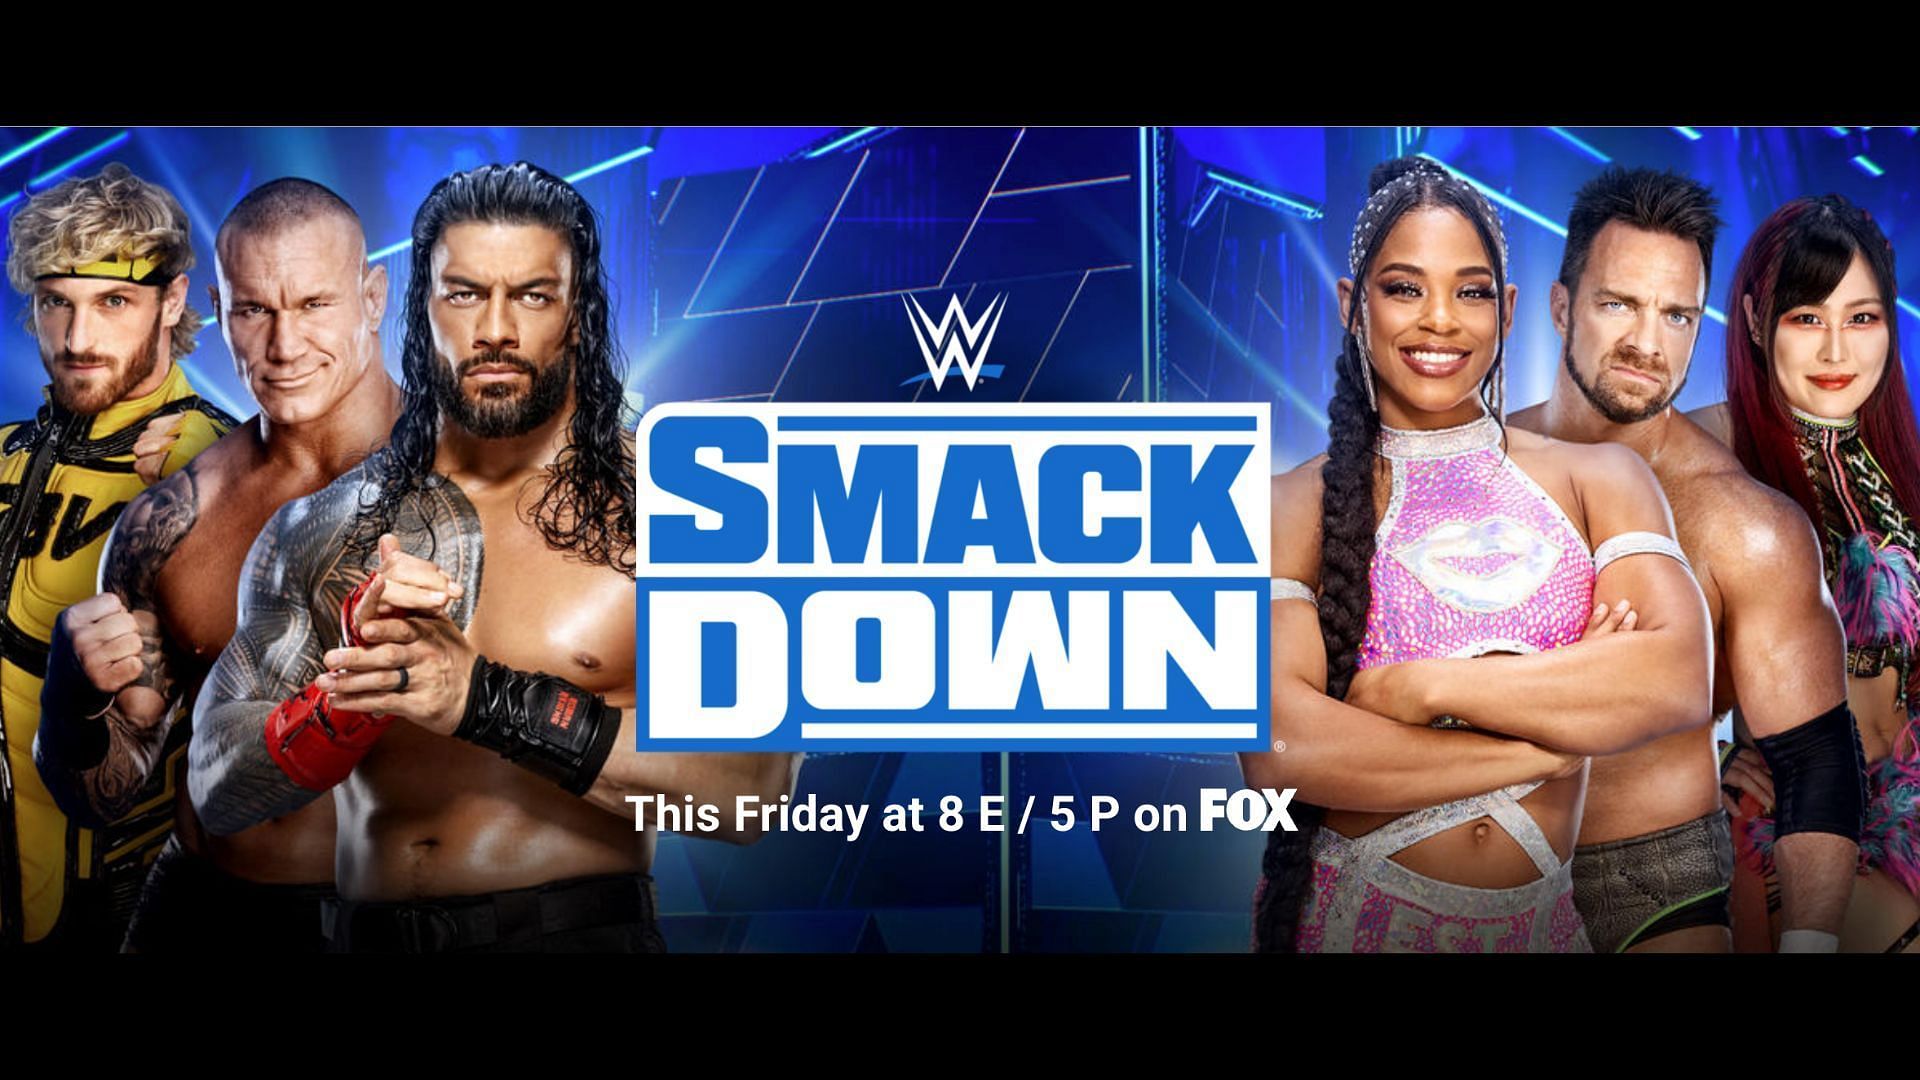 Charlotte Flair has been replaced on the SmackDown banner.